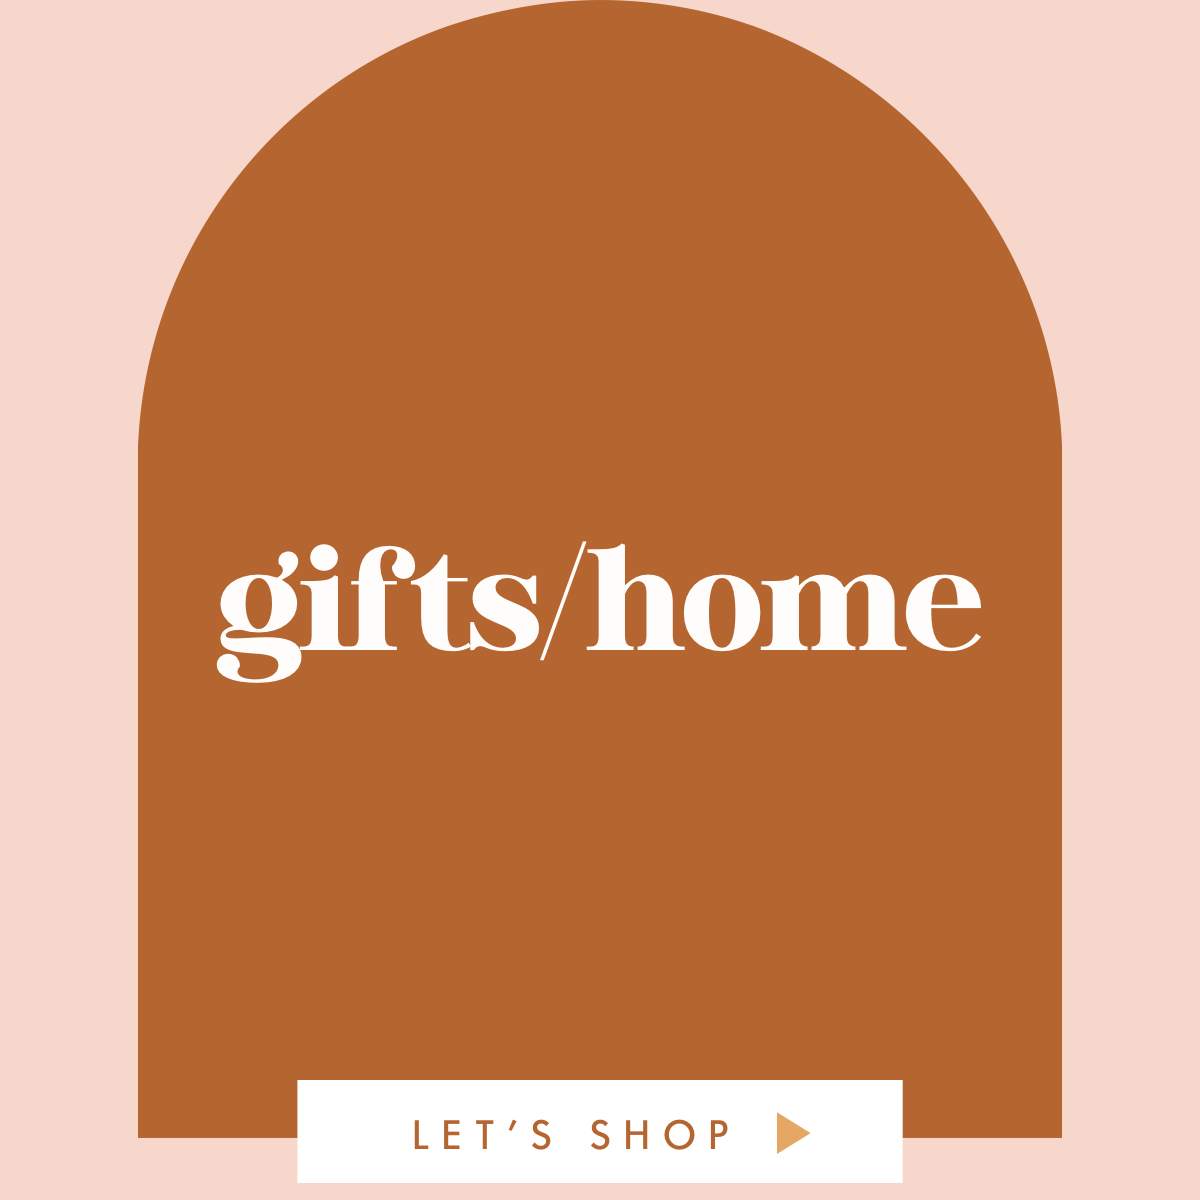 Gifts/Home